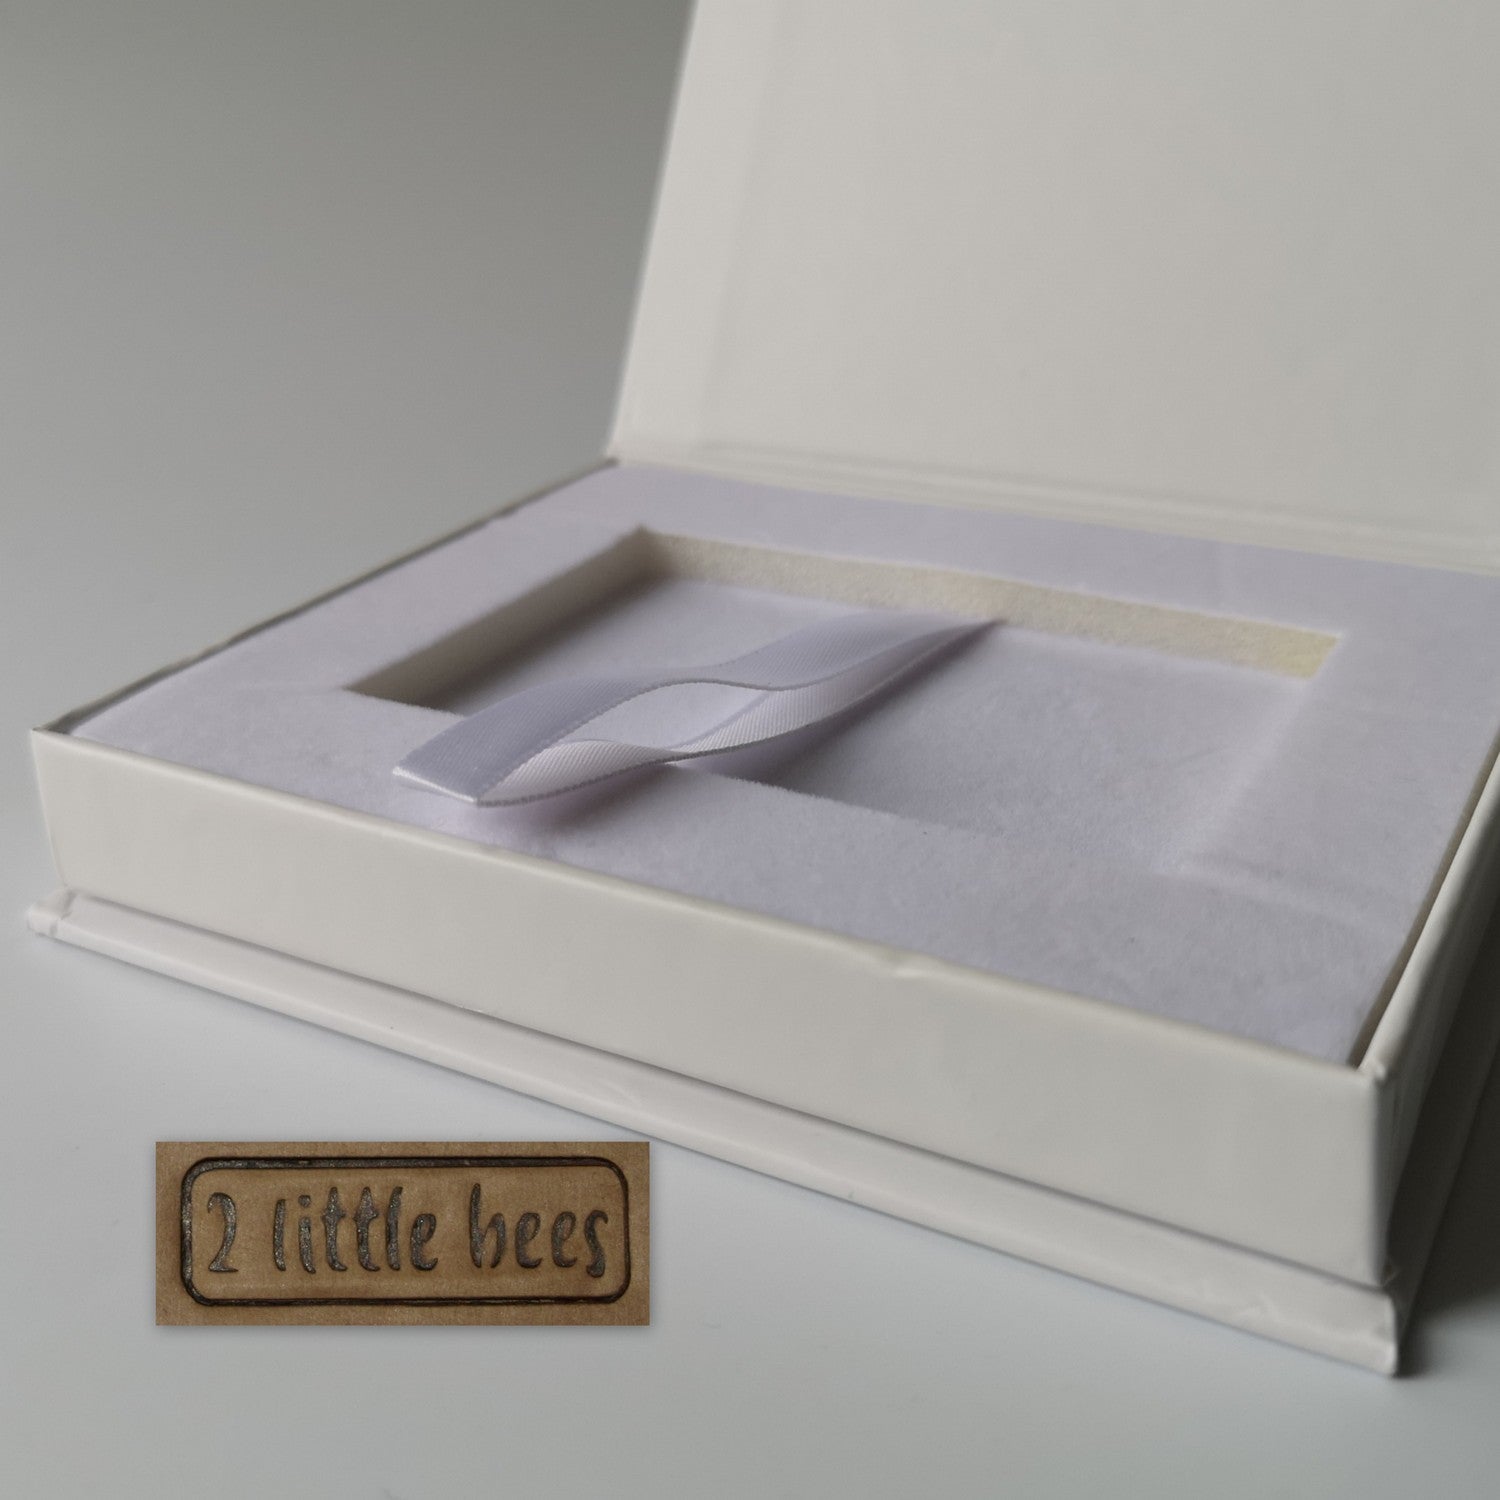 Small magnetic gift box. White - 2 little bees